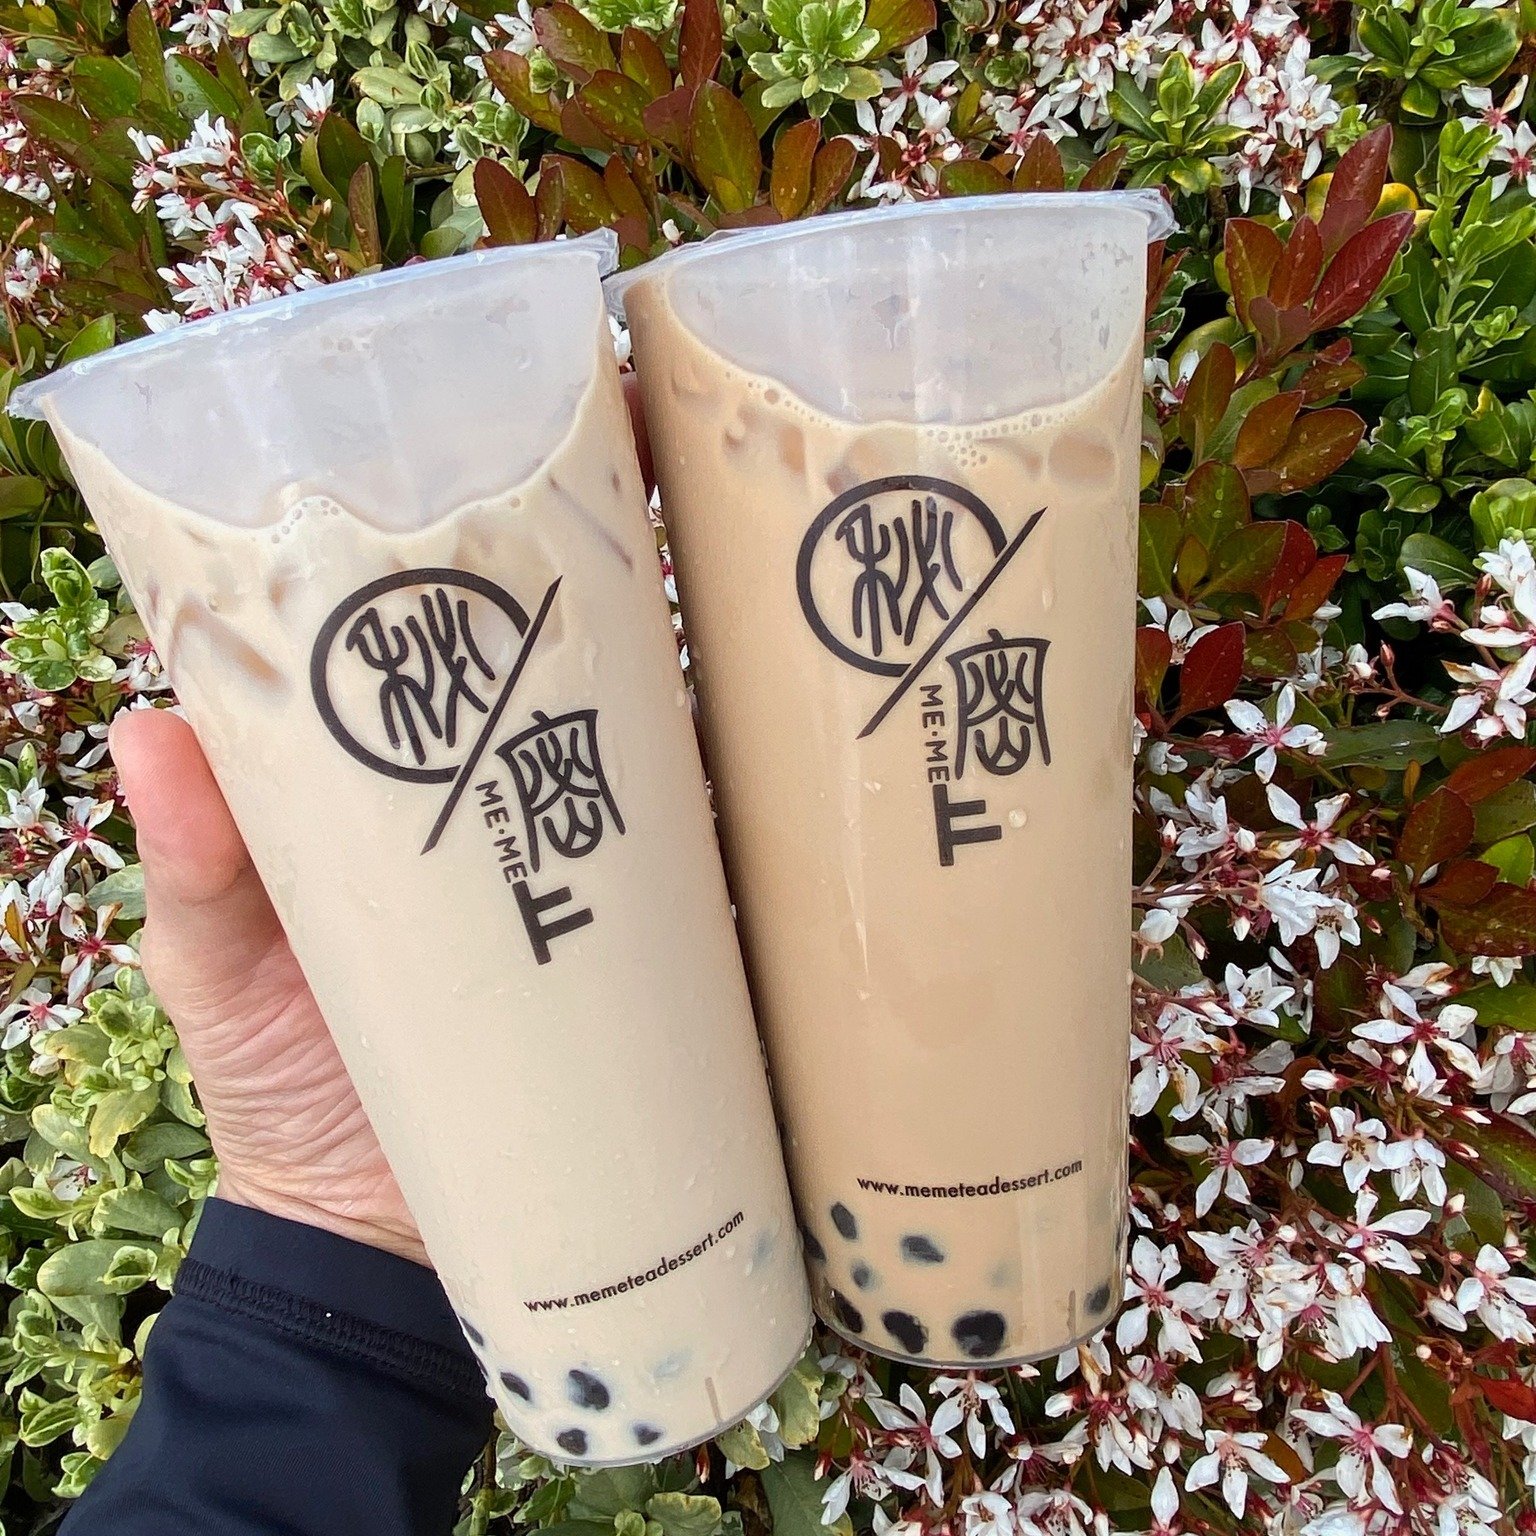 Happy Mother's Day🌷🌷

‼️OPEN DAILY AT 8:30AM!⏰ Closed Tuesdays
🔑Happiness starts with Me&middot;Me
📱Link in bio to order online!

#SupportLocal #supportlocalsandiego #familyowned
#sandiego #sddrinks
#sdbeverages #bestfoodsandiego #yelpsandiego
#y